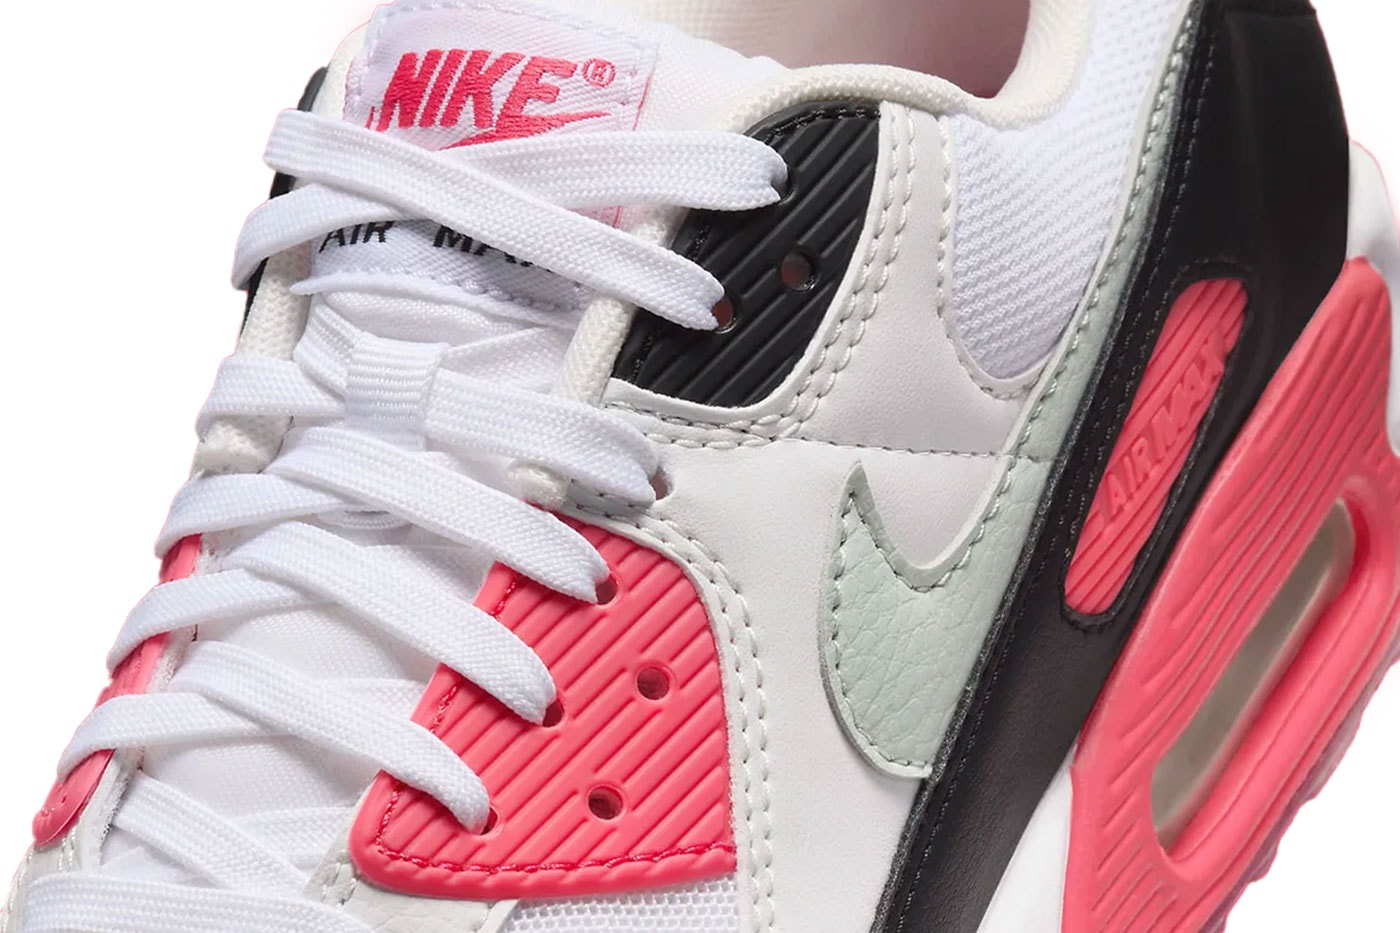 Nike Air Max 90 Aster Pink DH8010-105 Mesh Leather Suede Release Info swoosh White/Light Silver-Aster Pink-Black fall 2024 release date sneakers air max day